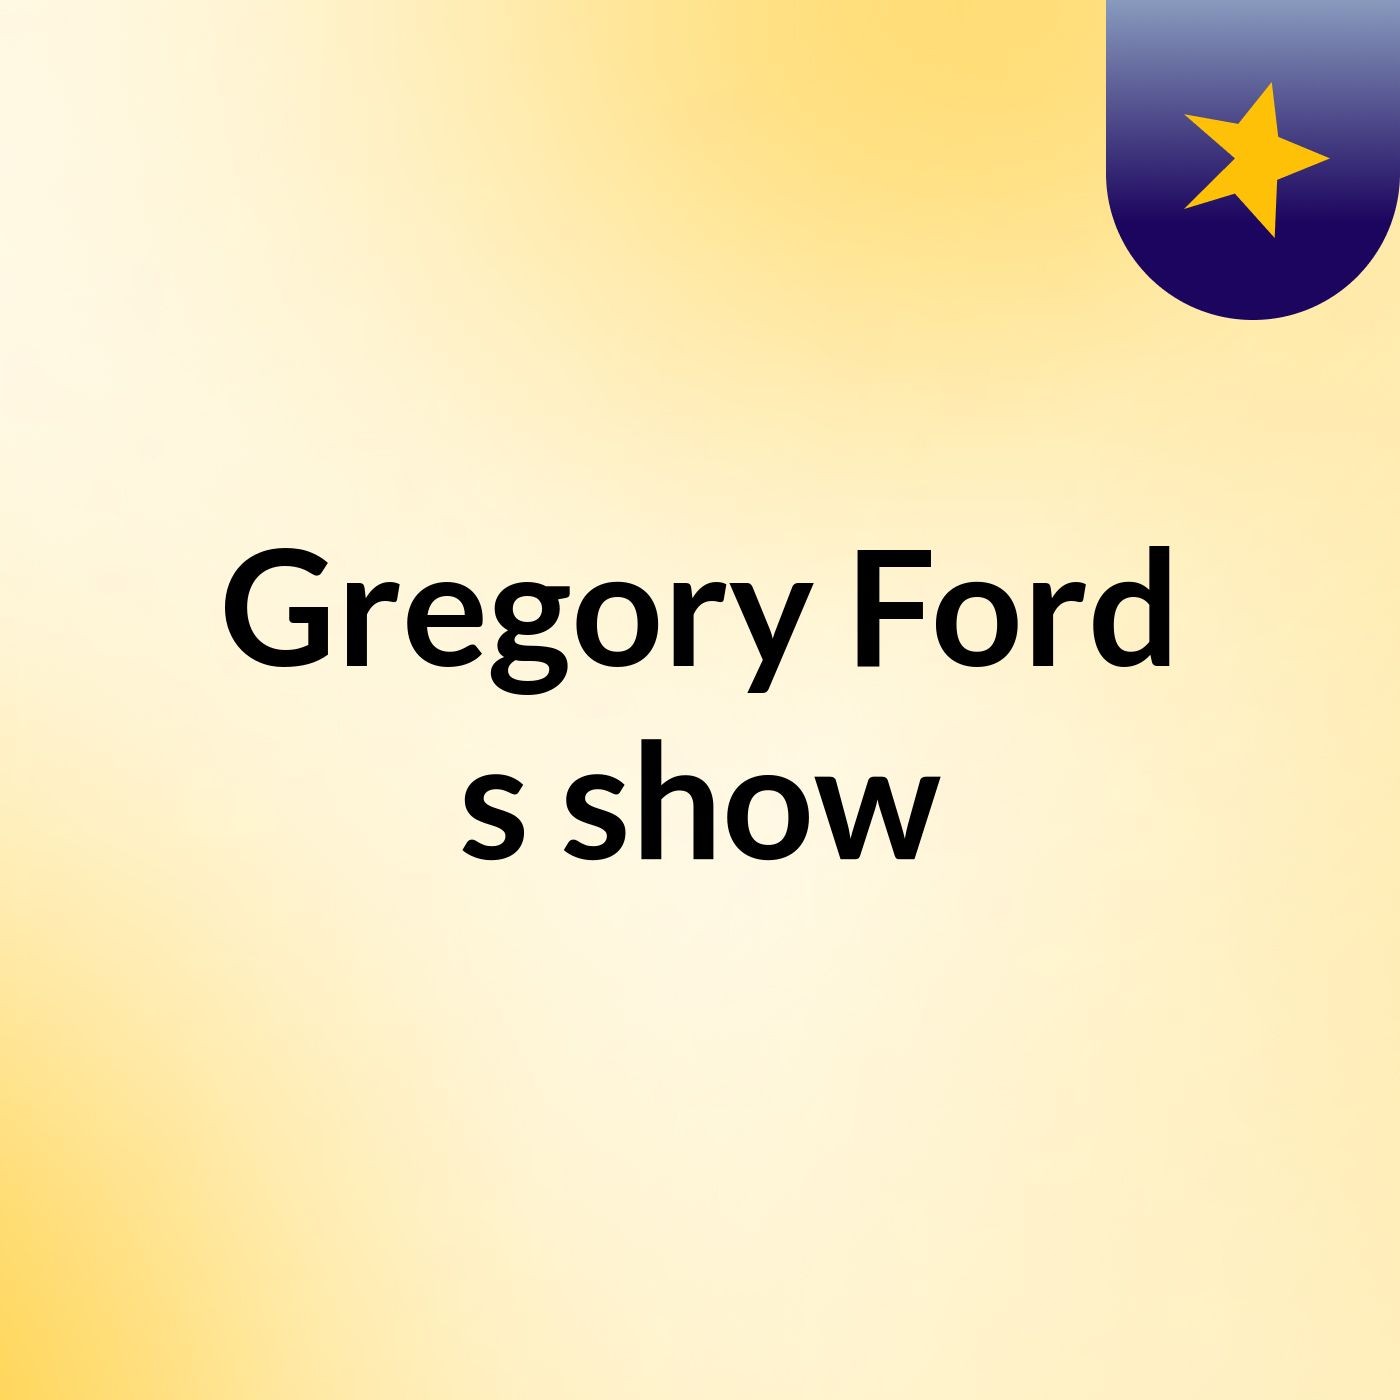 Episode 11 - Gregory Ford's show